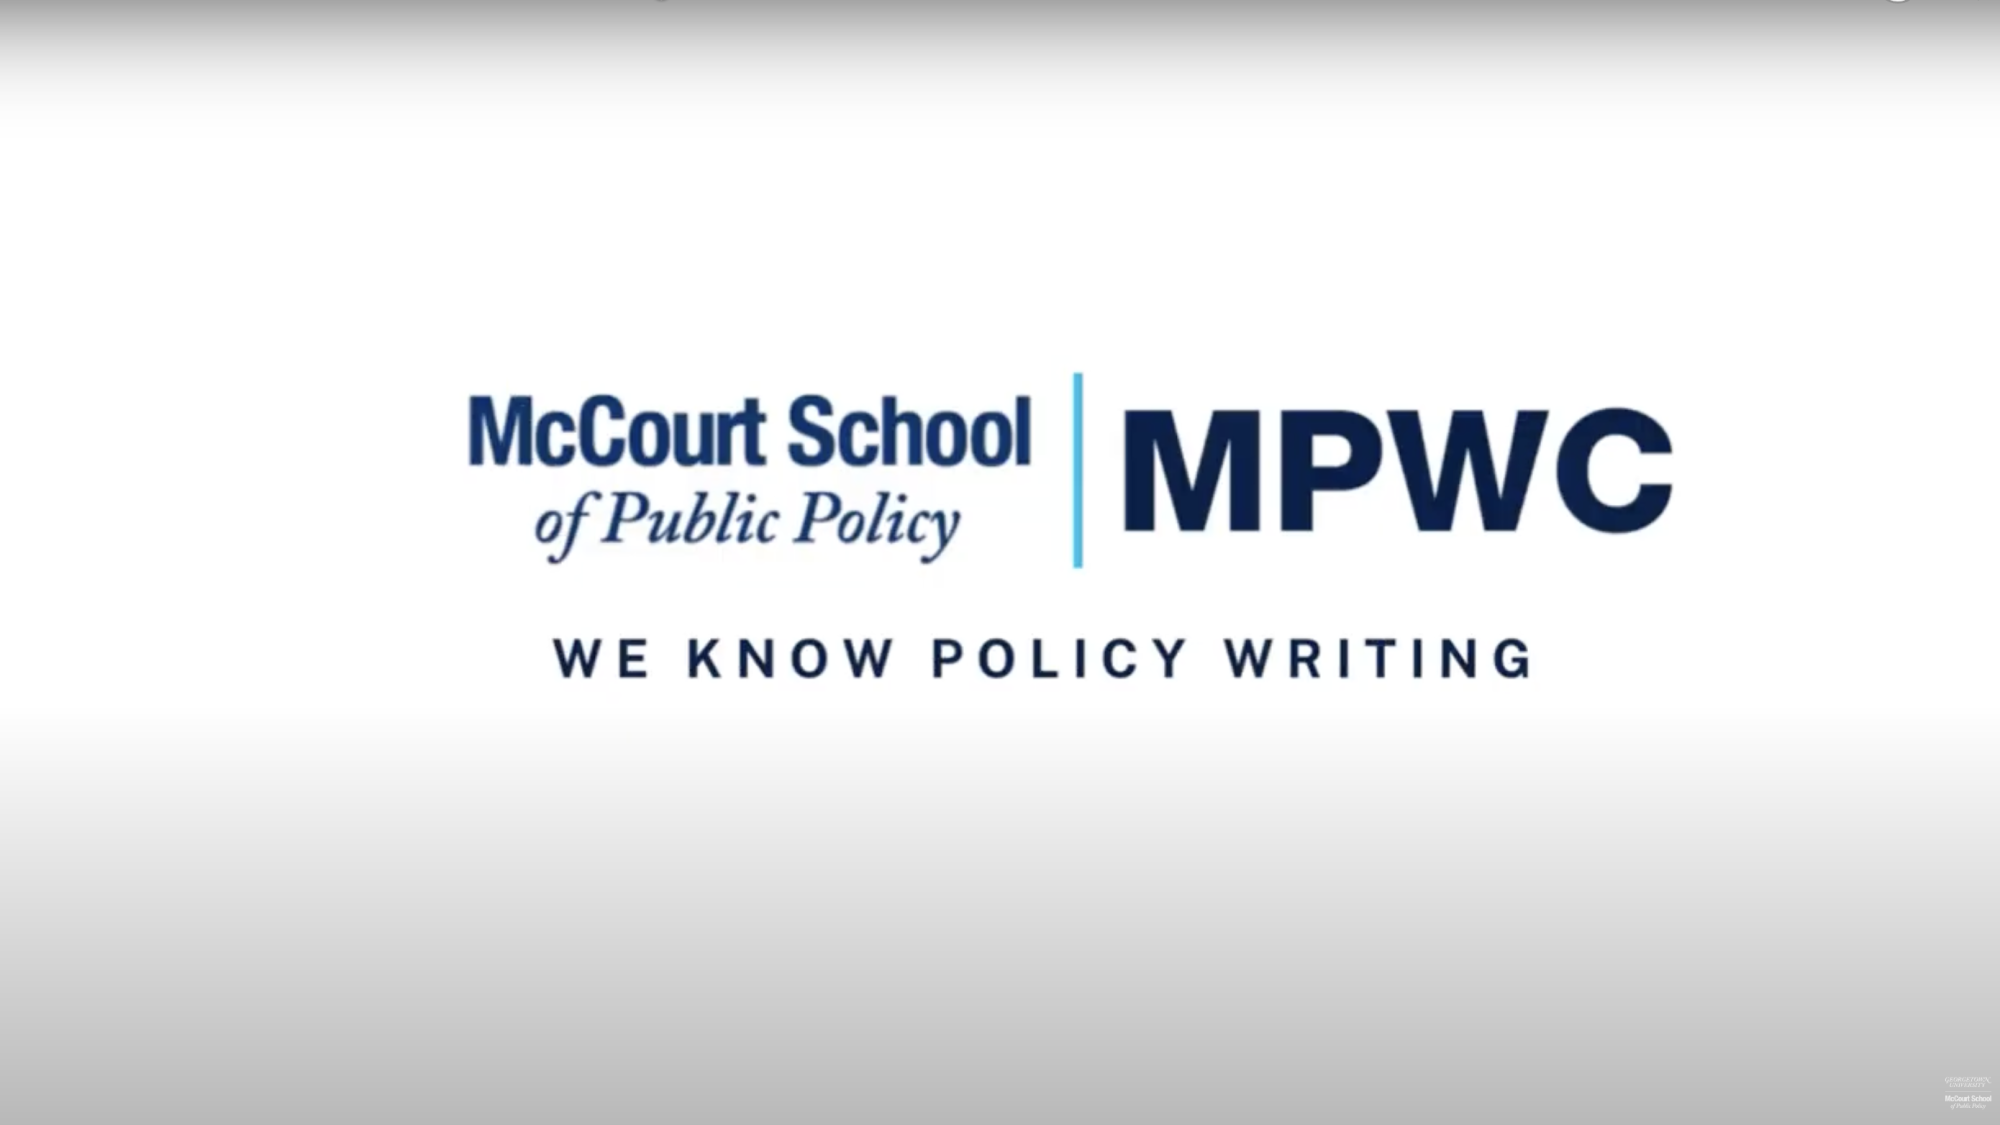 McCourt Policy Writing Center